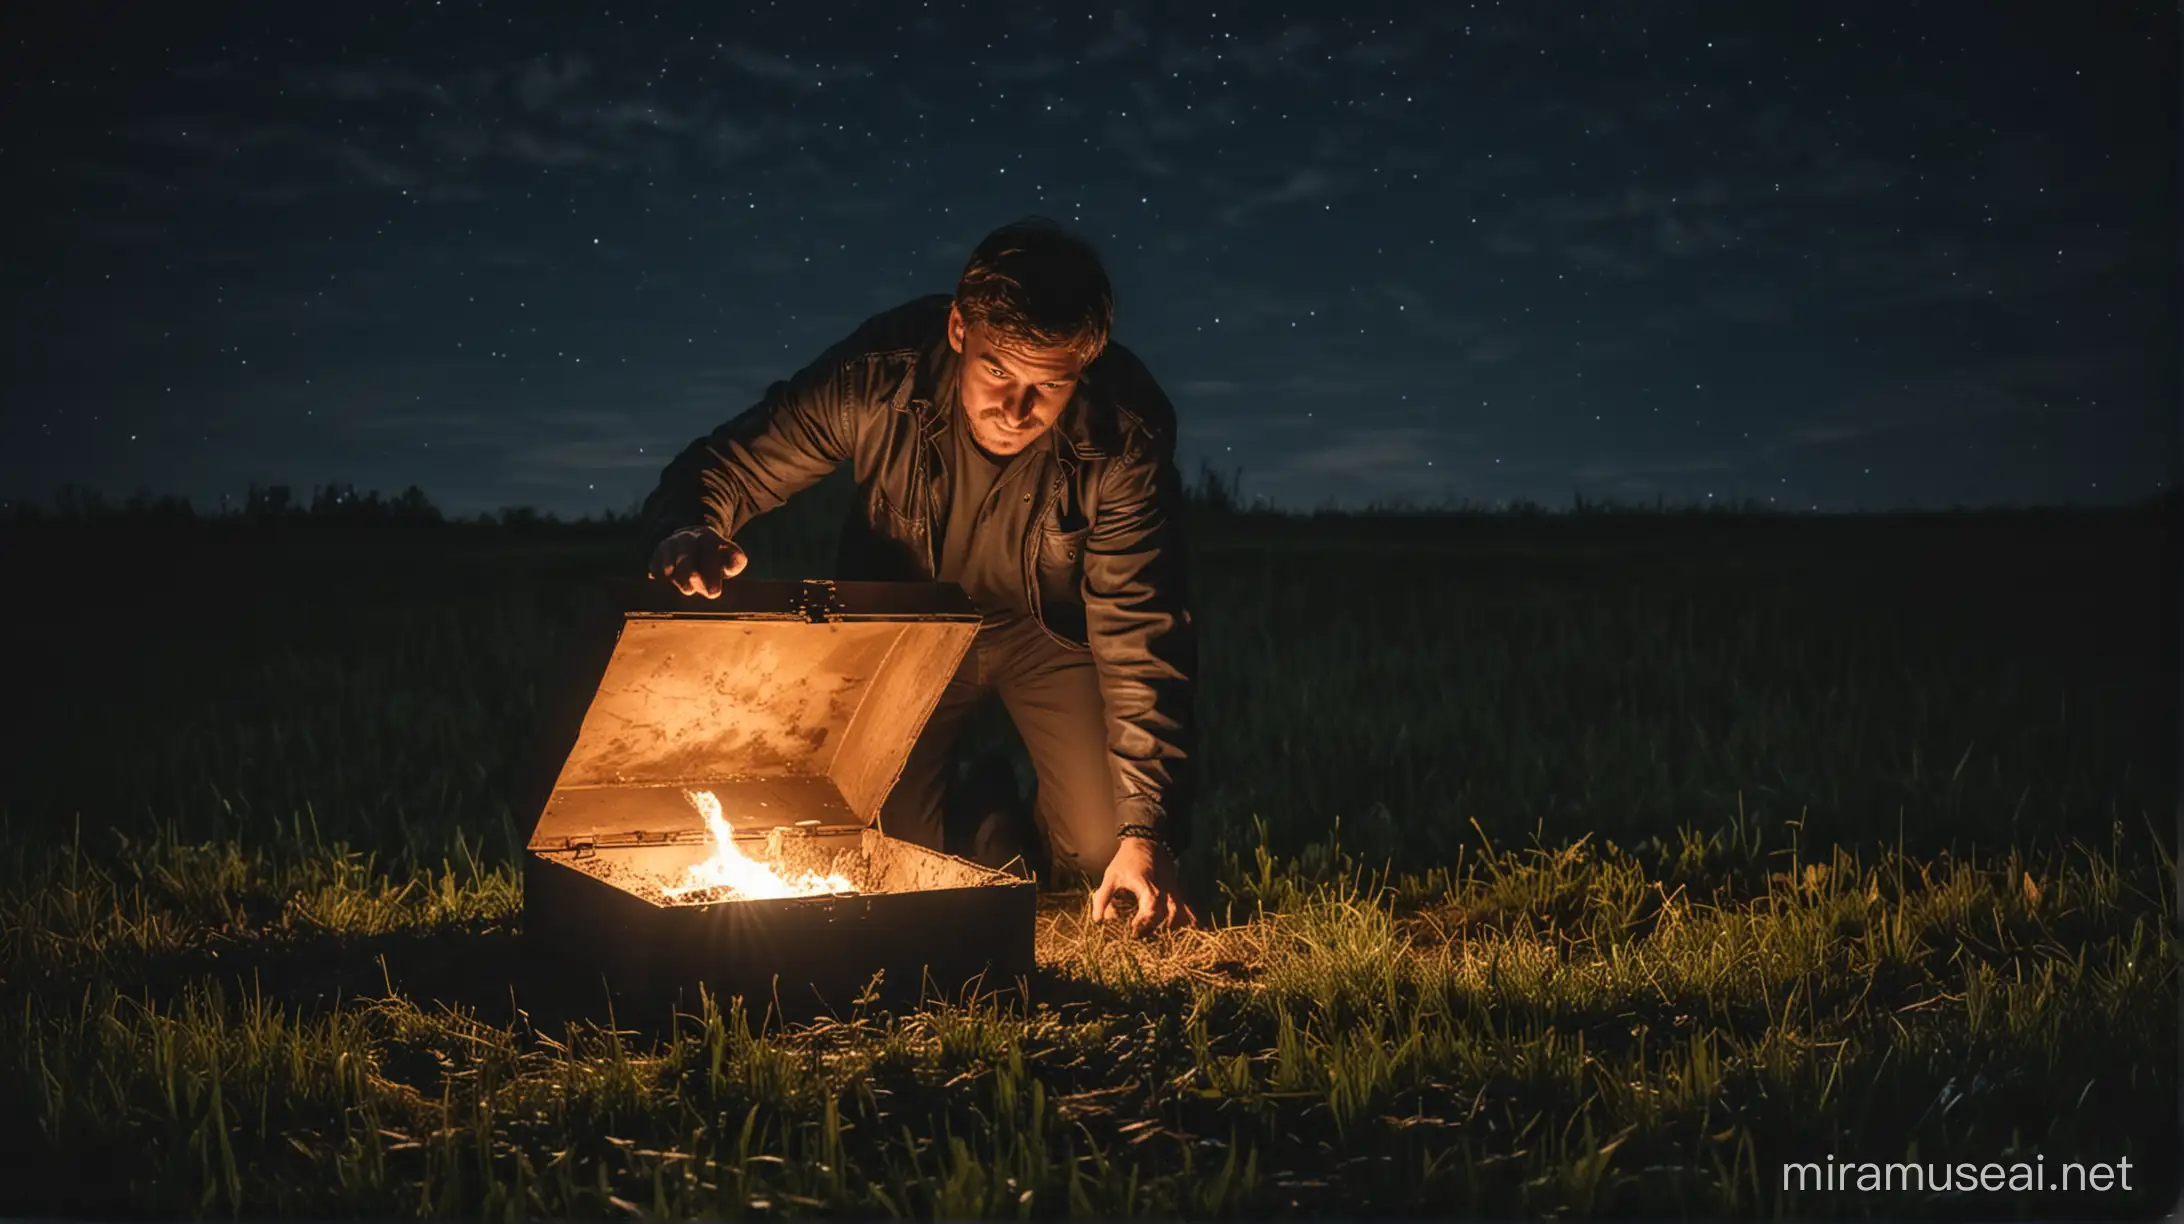 A man finds a glowing chest in a hole in the field at night.
